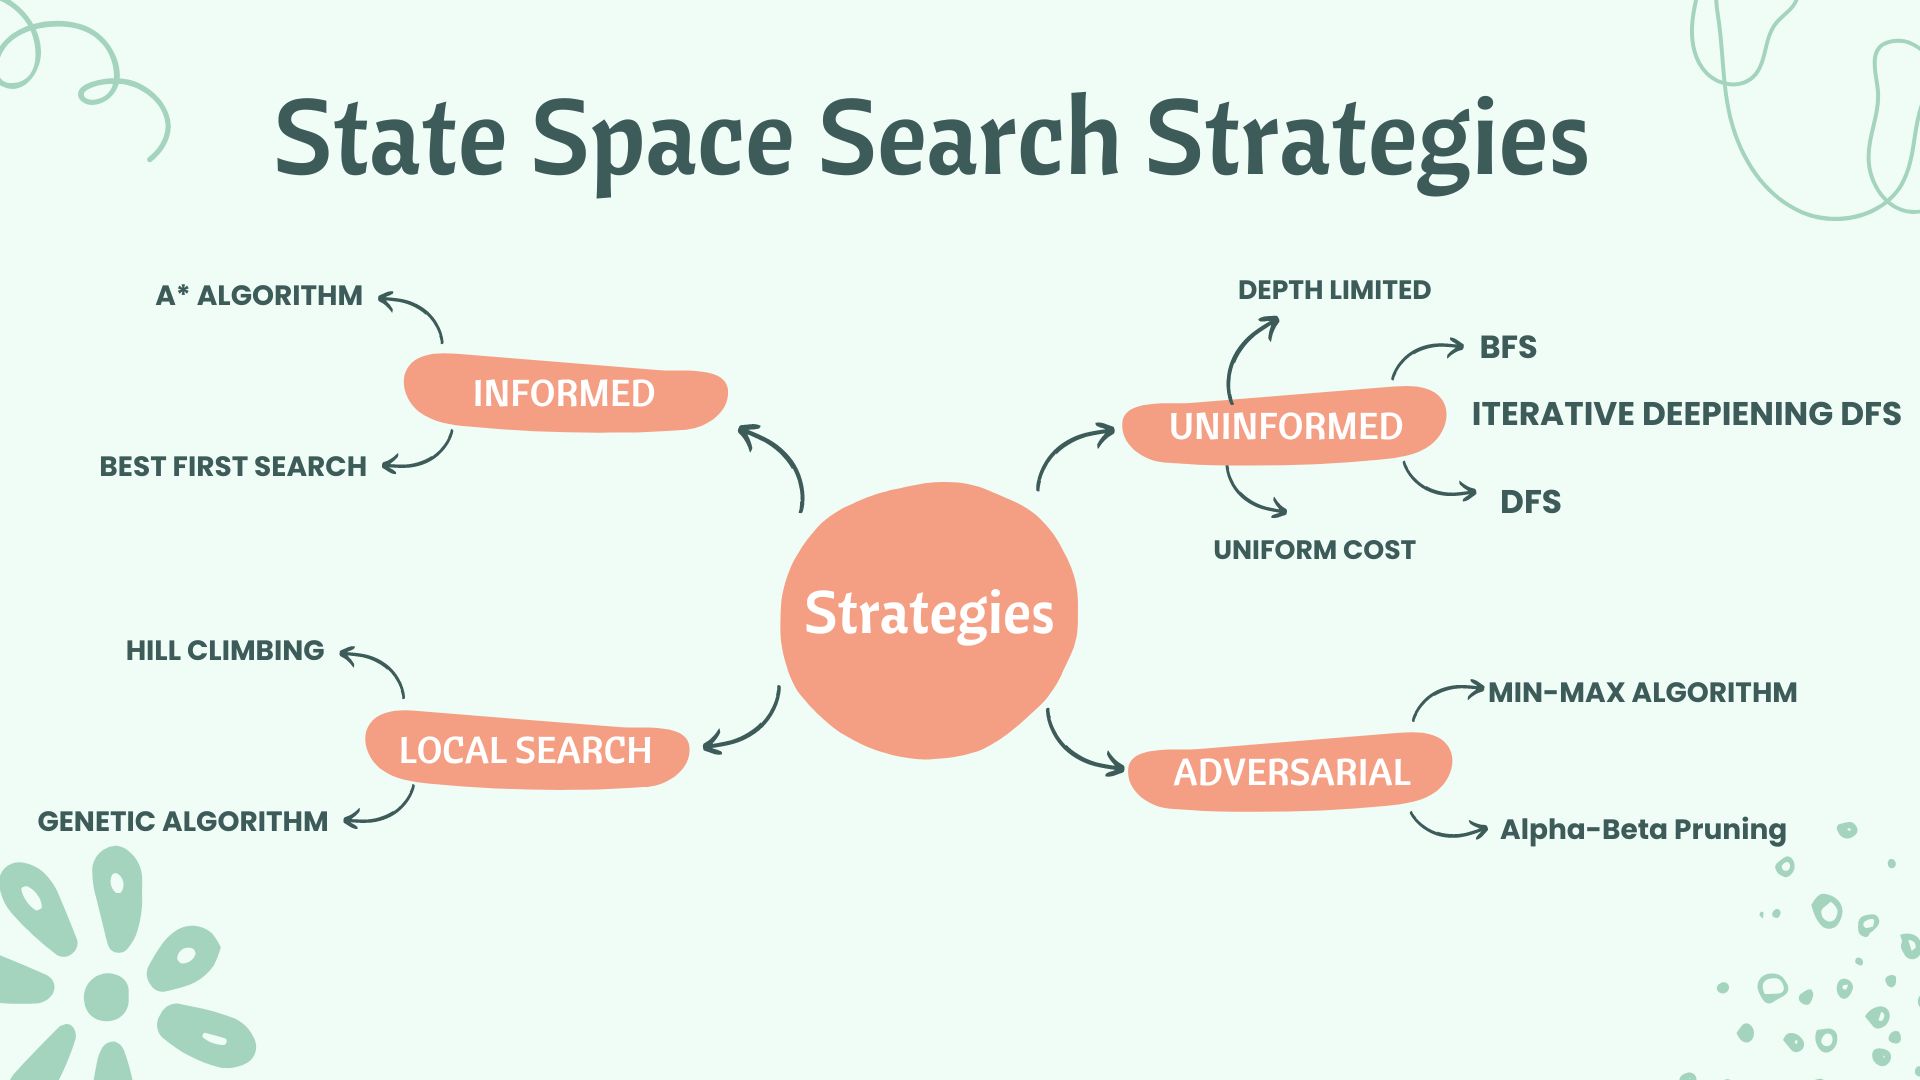 Search Strategies